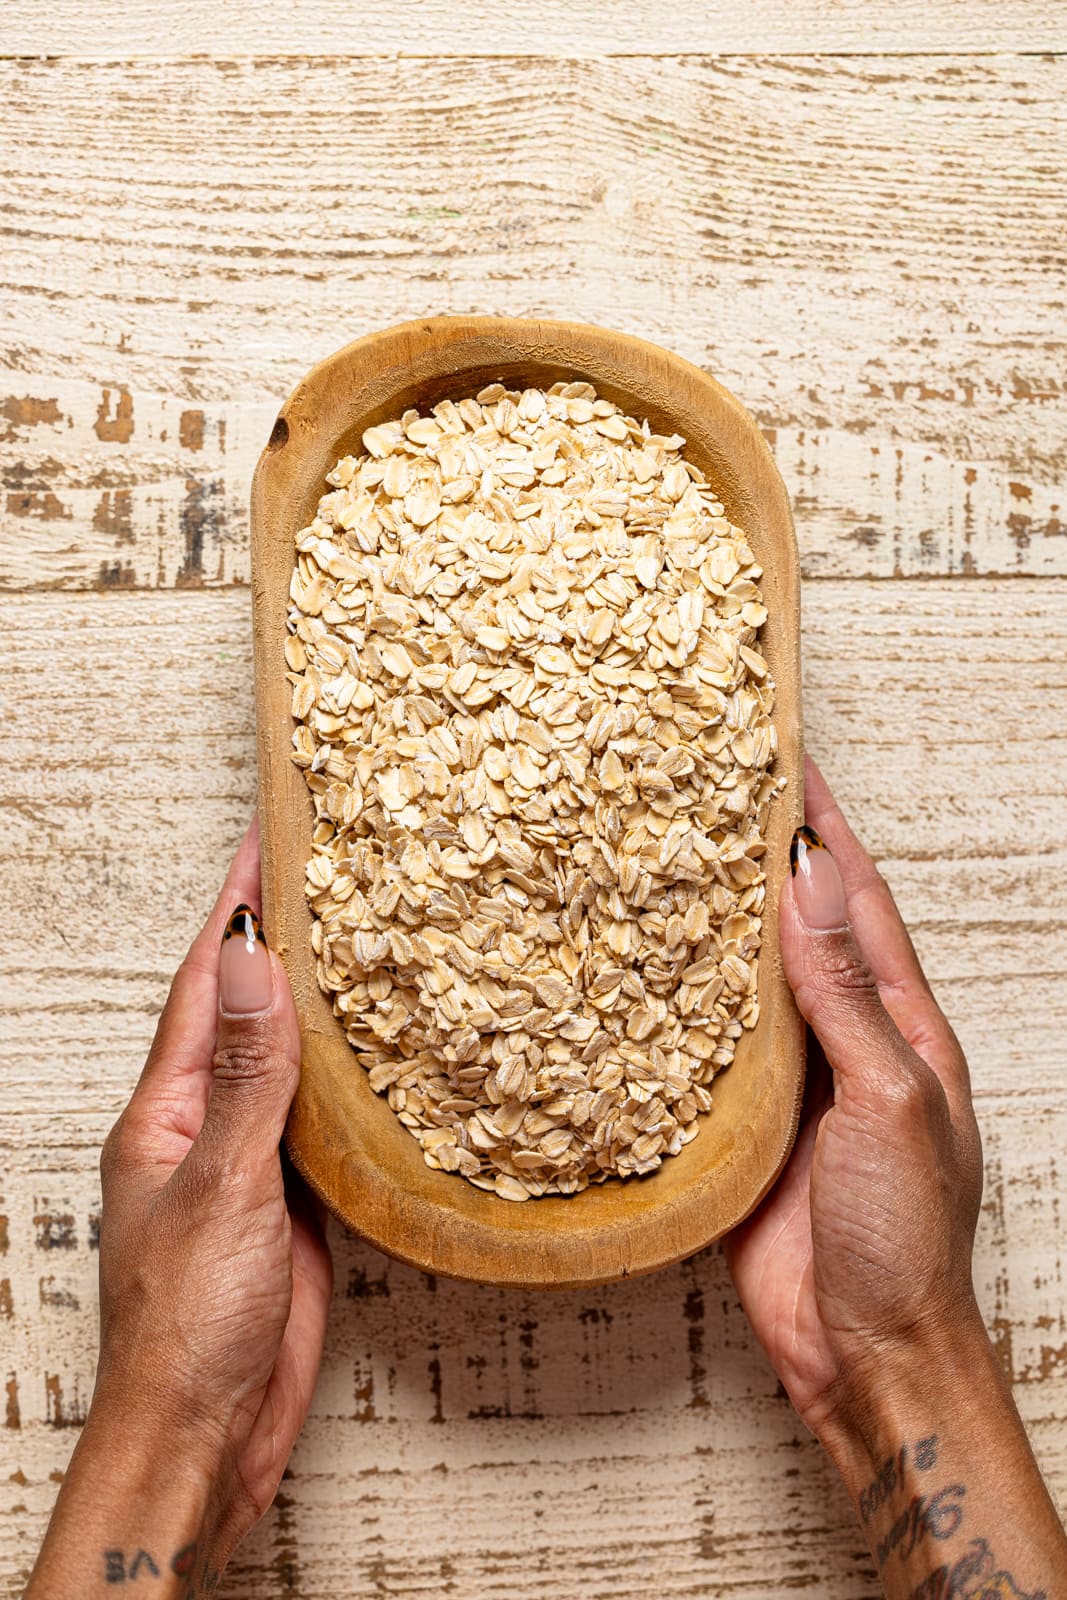 Oats in a bowl being held.